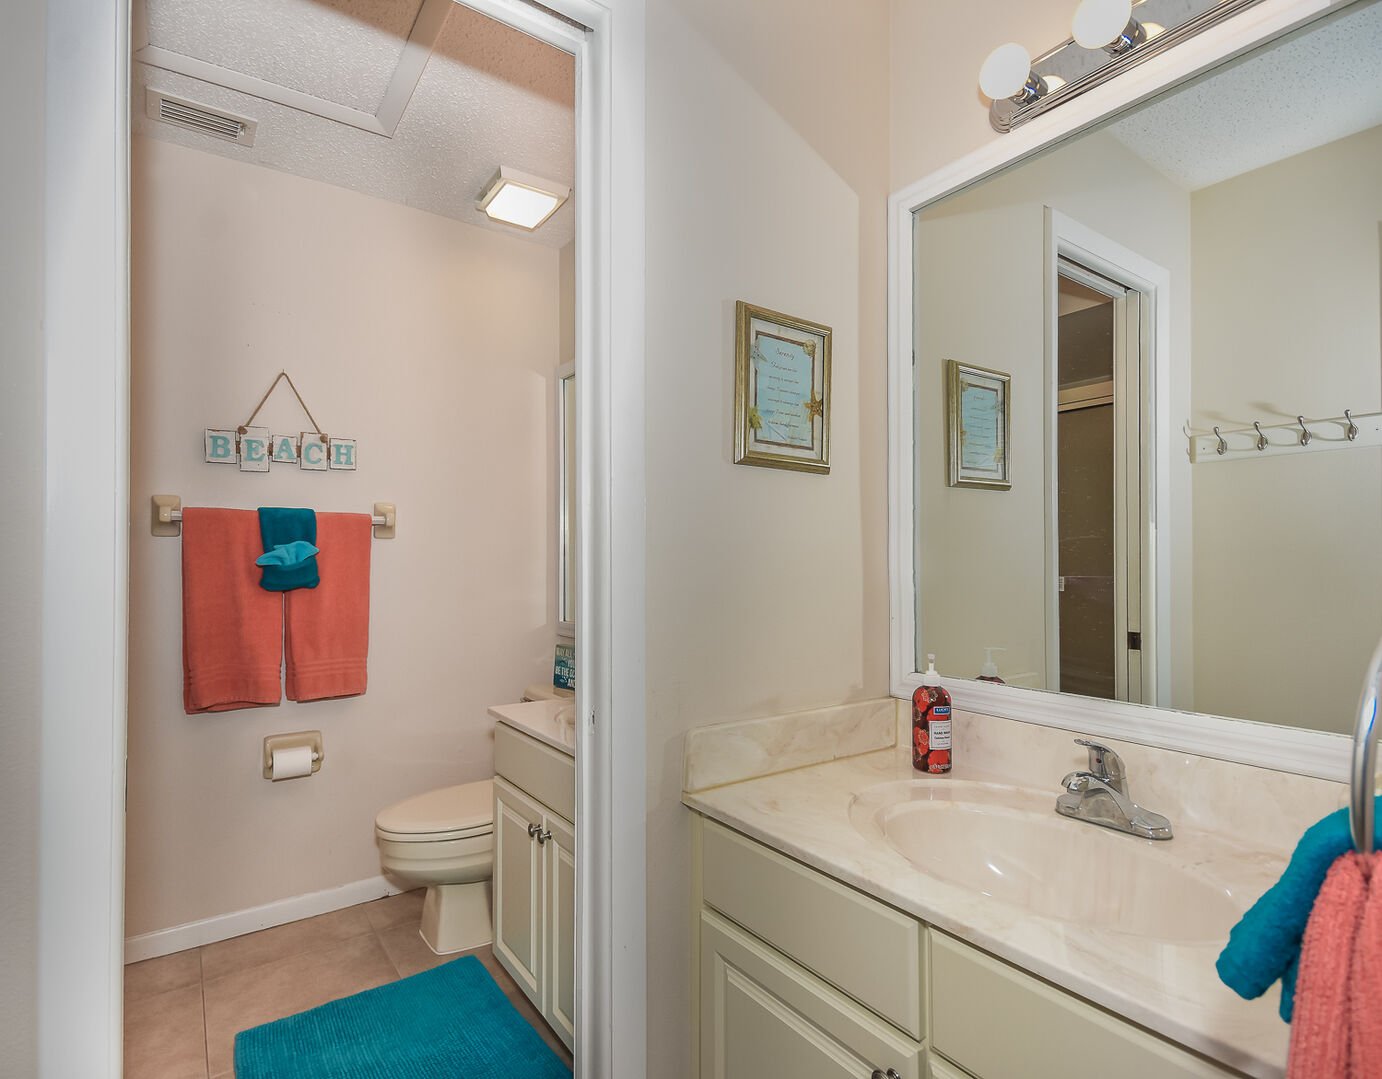 Private master bath features a vanity and his/her sinks.